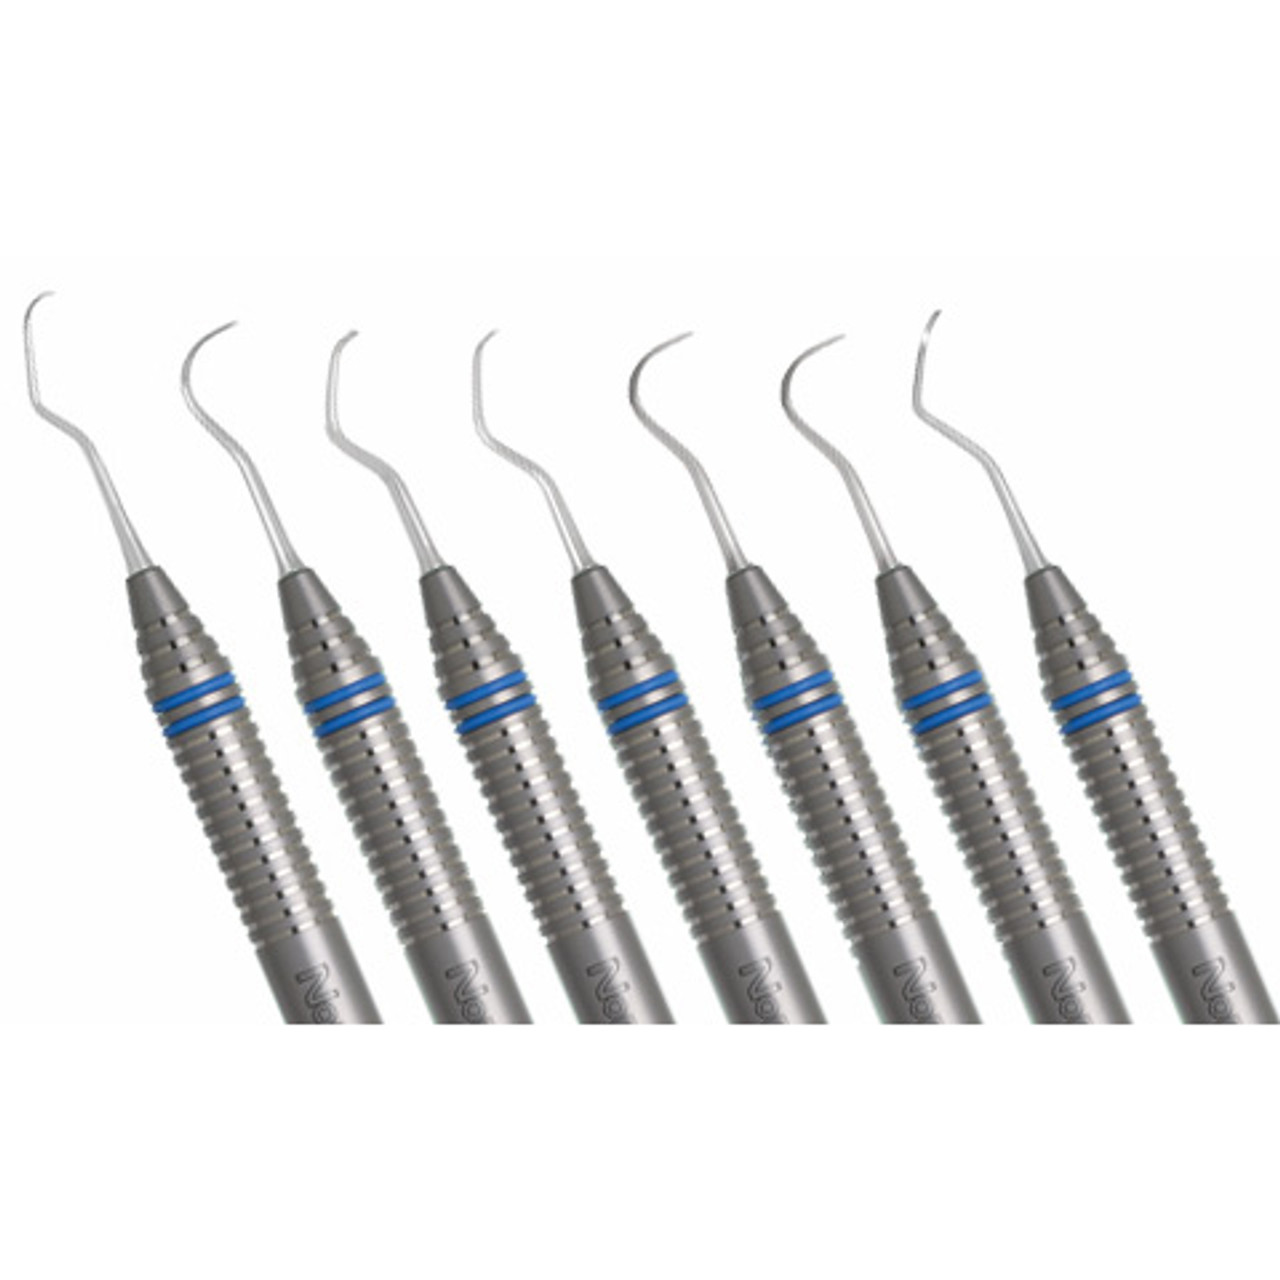 Nordent - Curette Gracey Double End 13/14 DuraLite ColorRing Stainless Steel Each